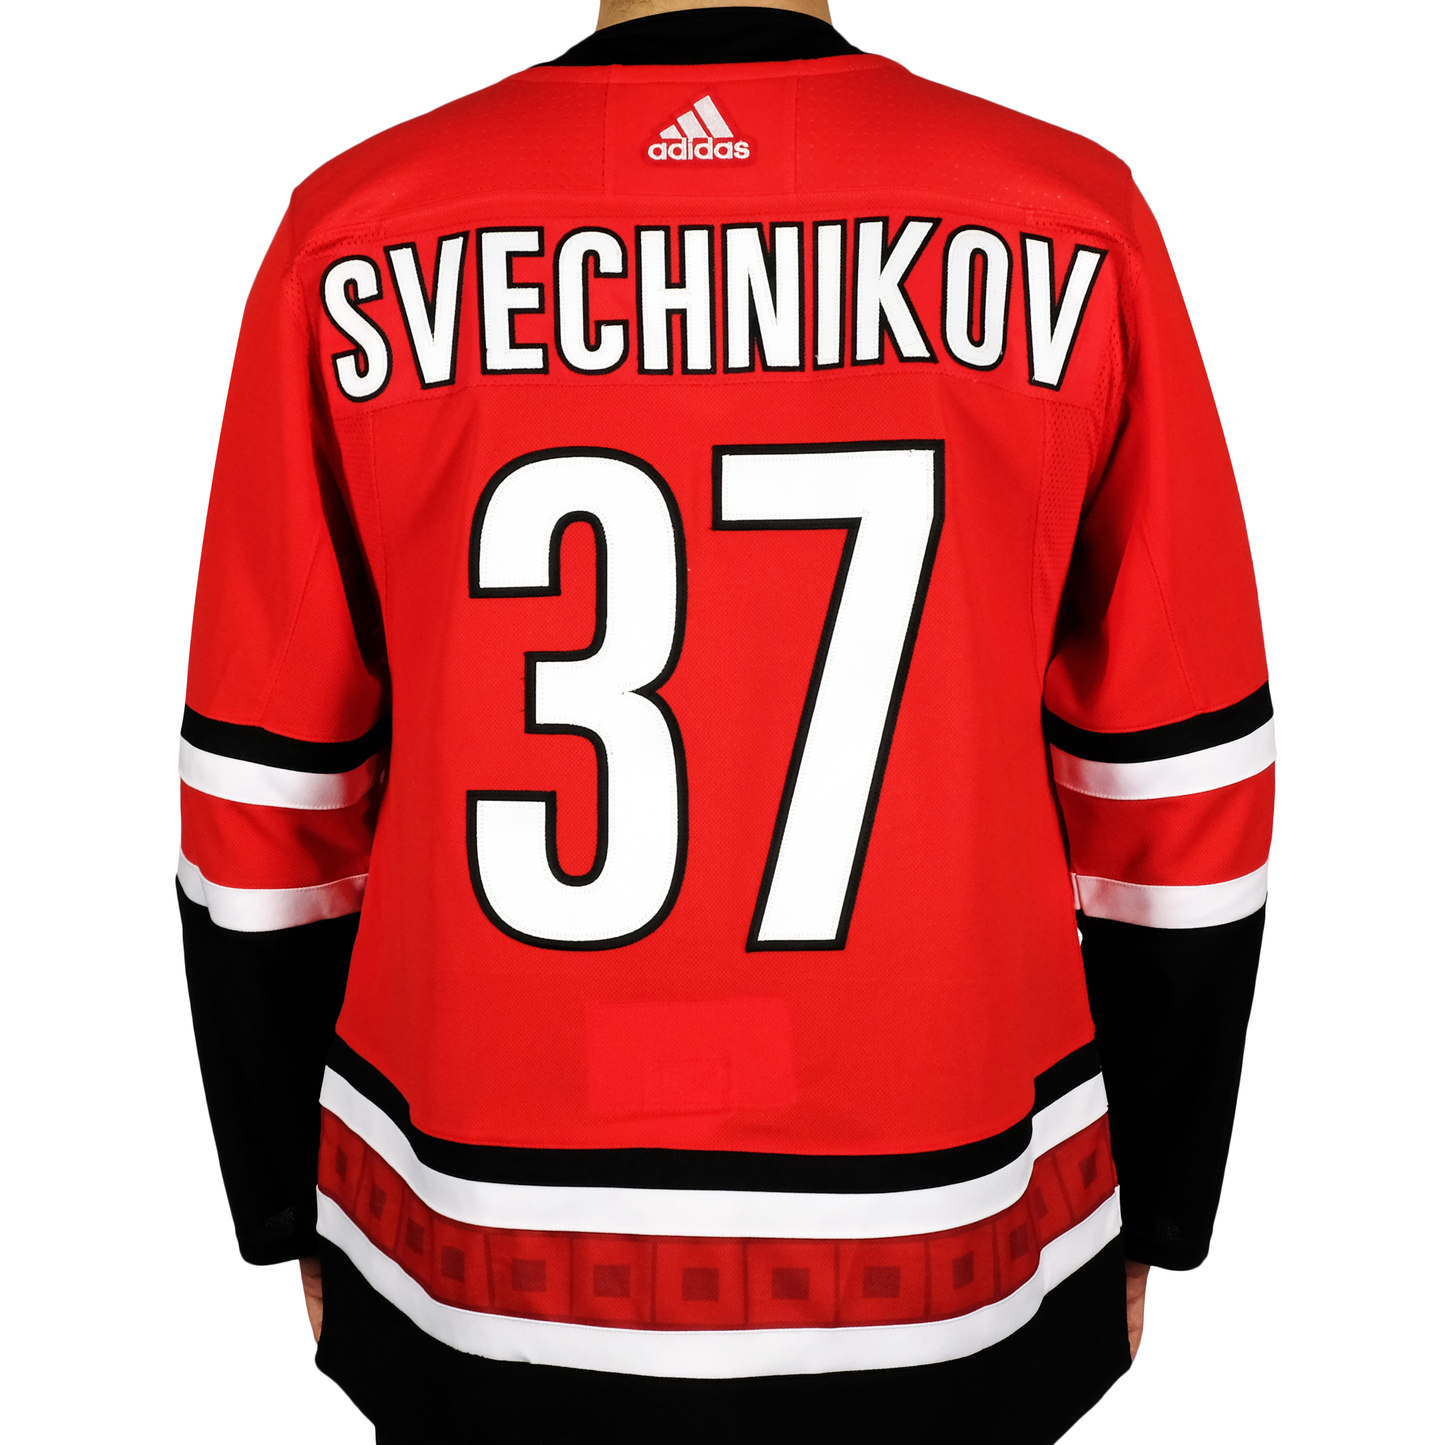 Back View: Hurricanes Red Adidas Jersey with Svechnikov 37 on back.